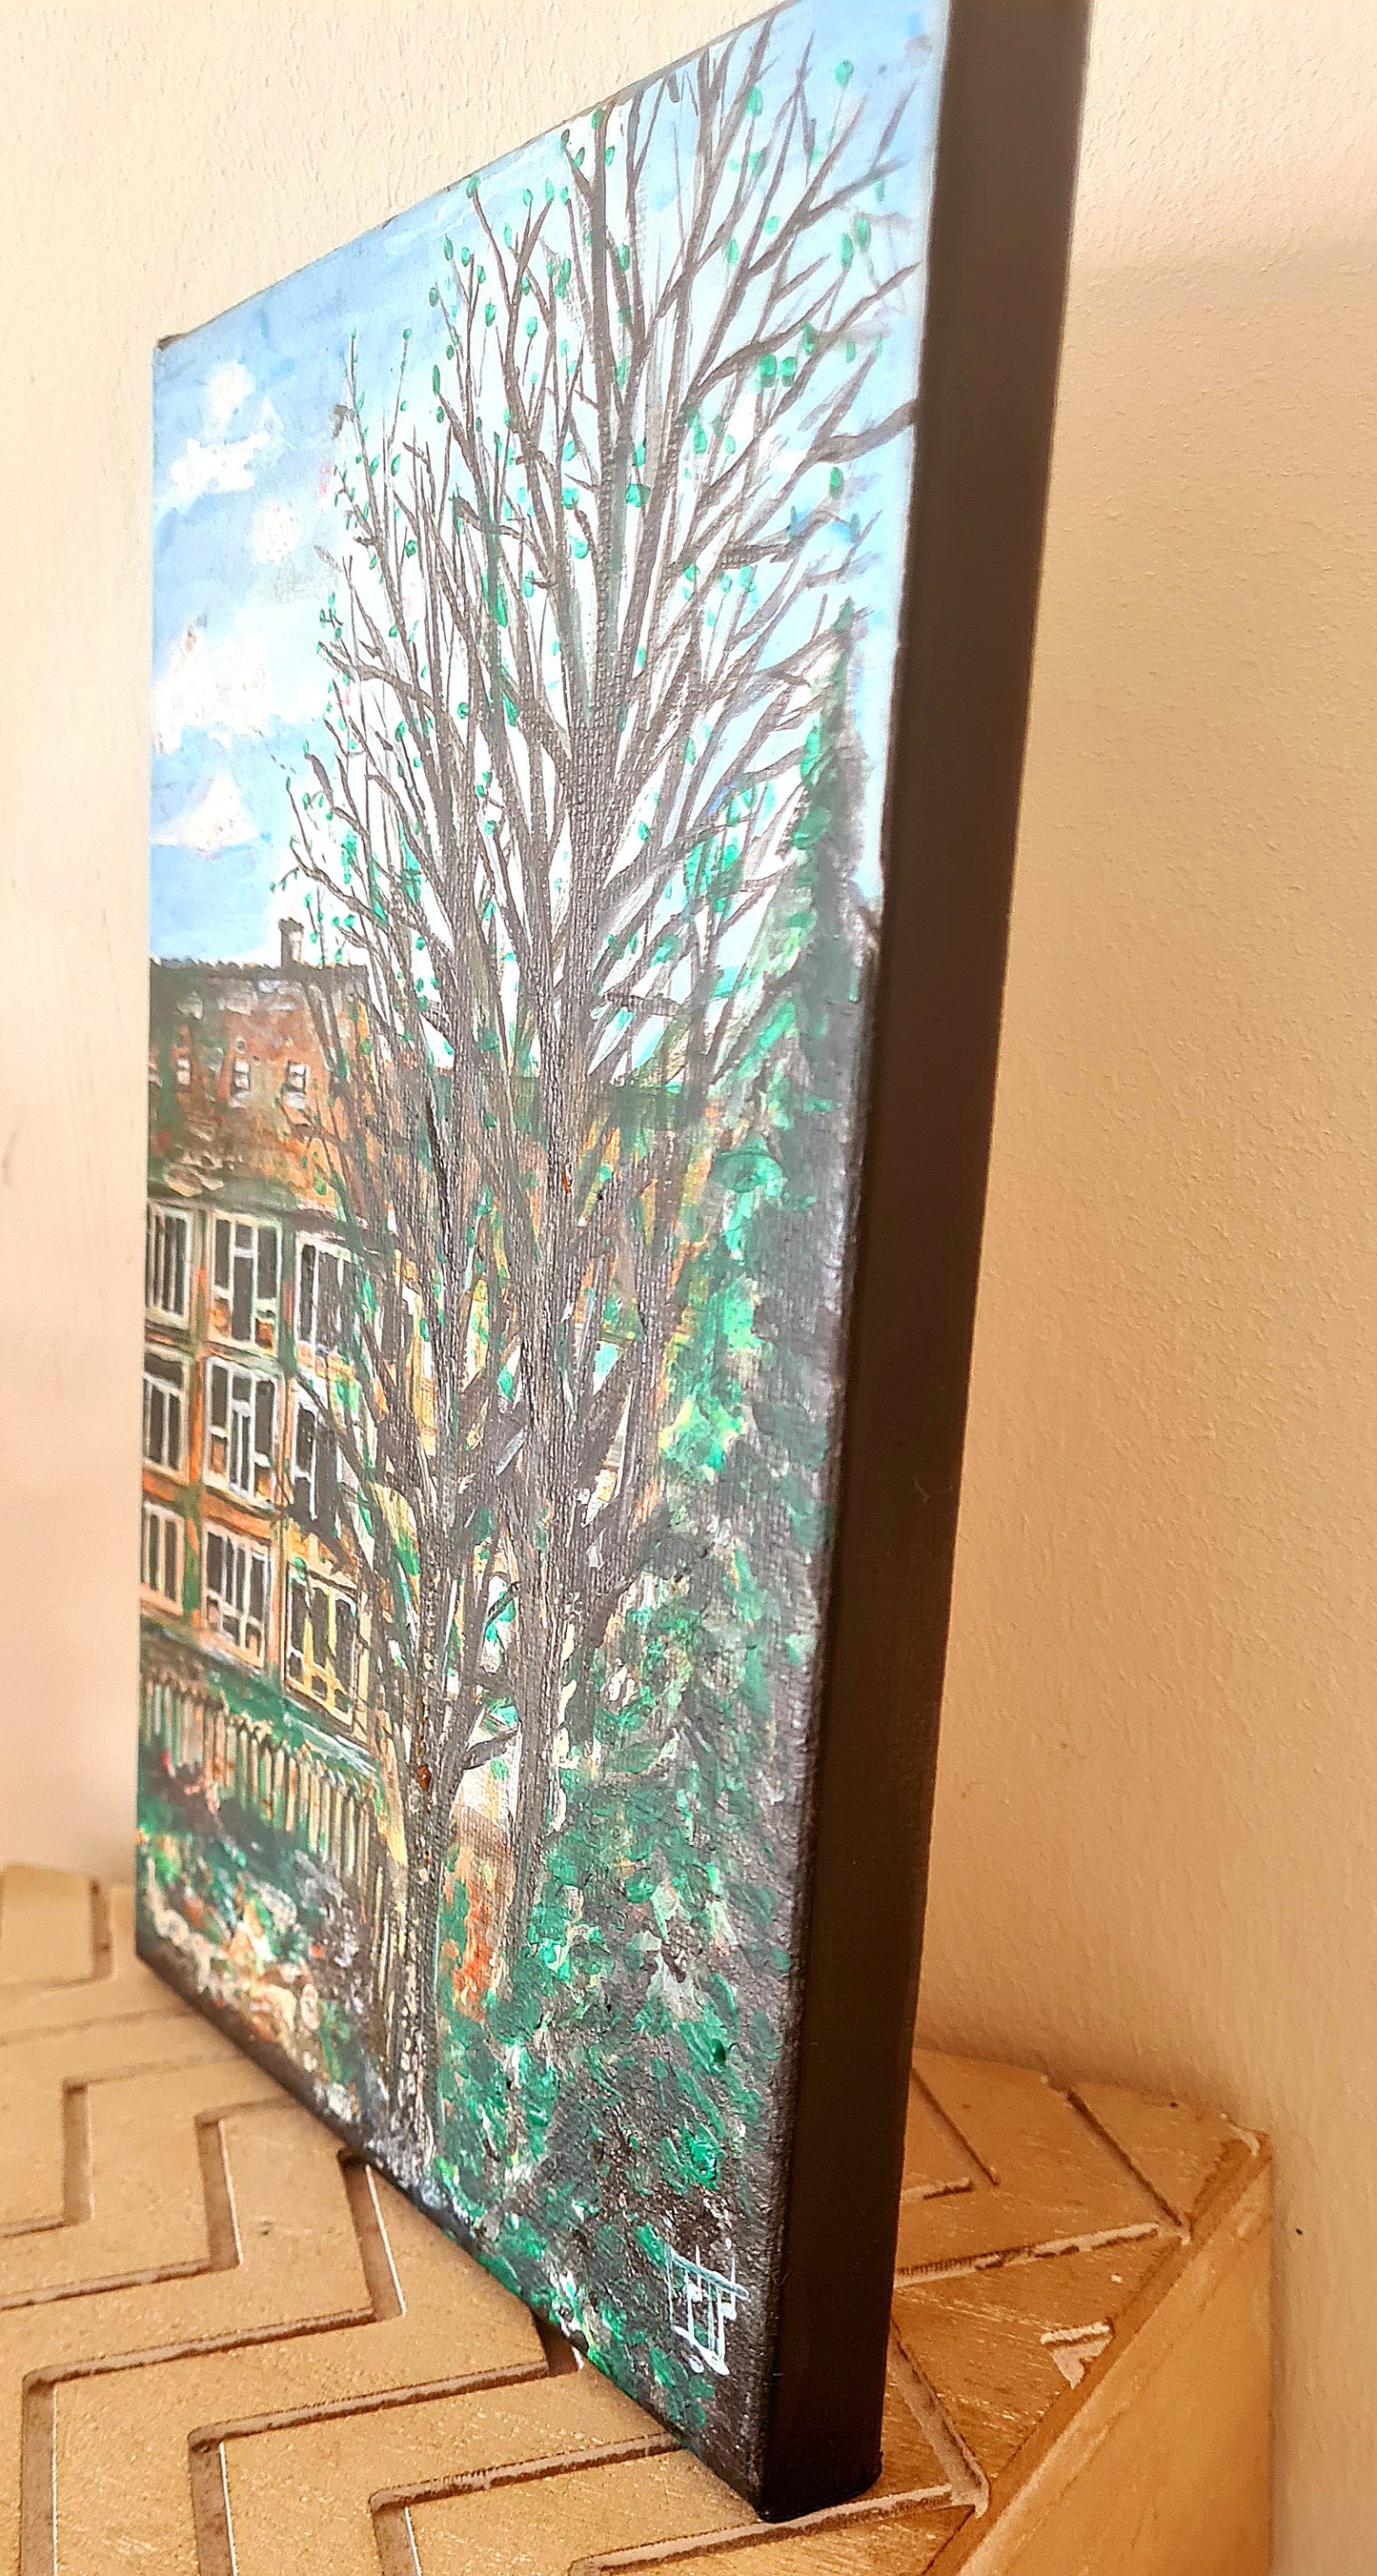 Acrylic painting of Amsterdam with tall tree, red brick building, muted colors, and dreamy background.